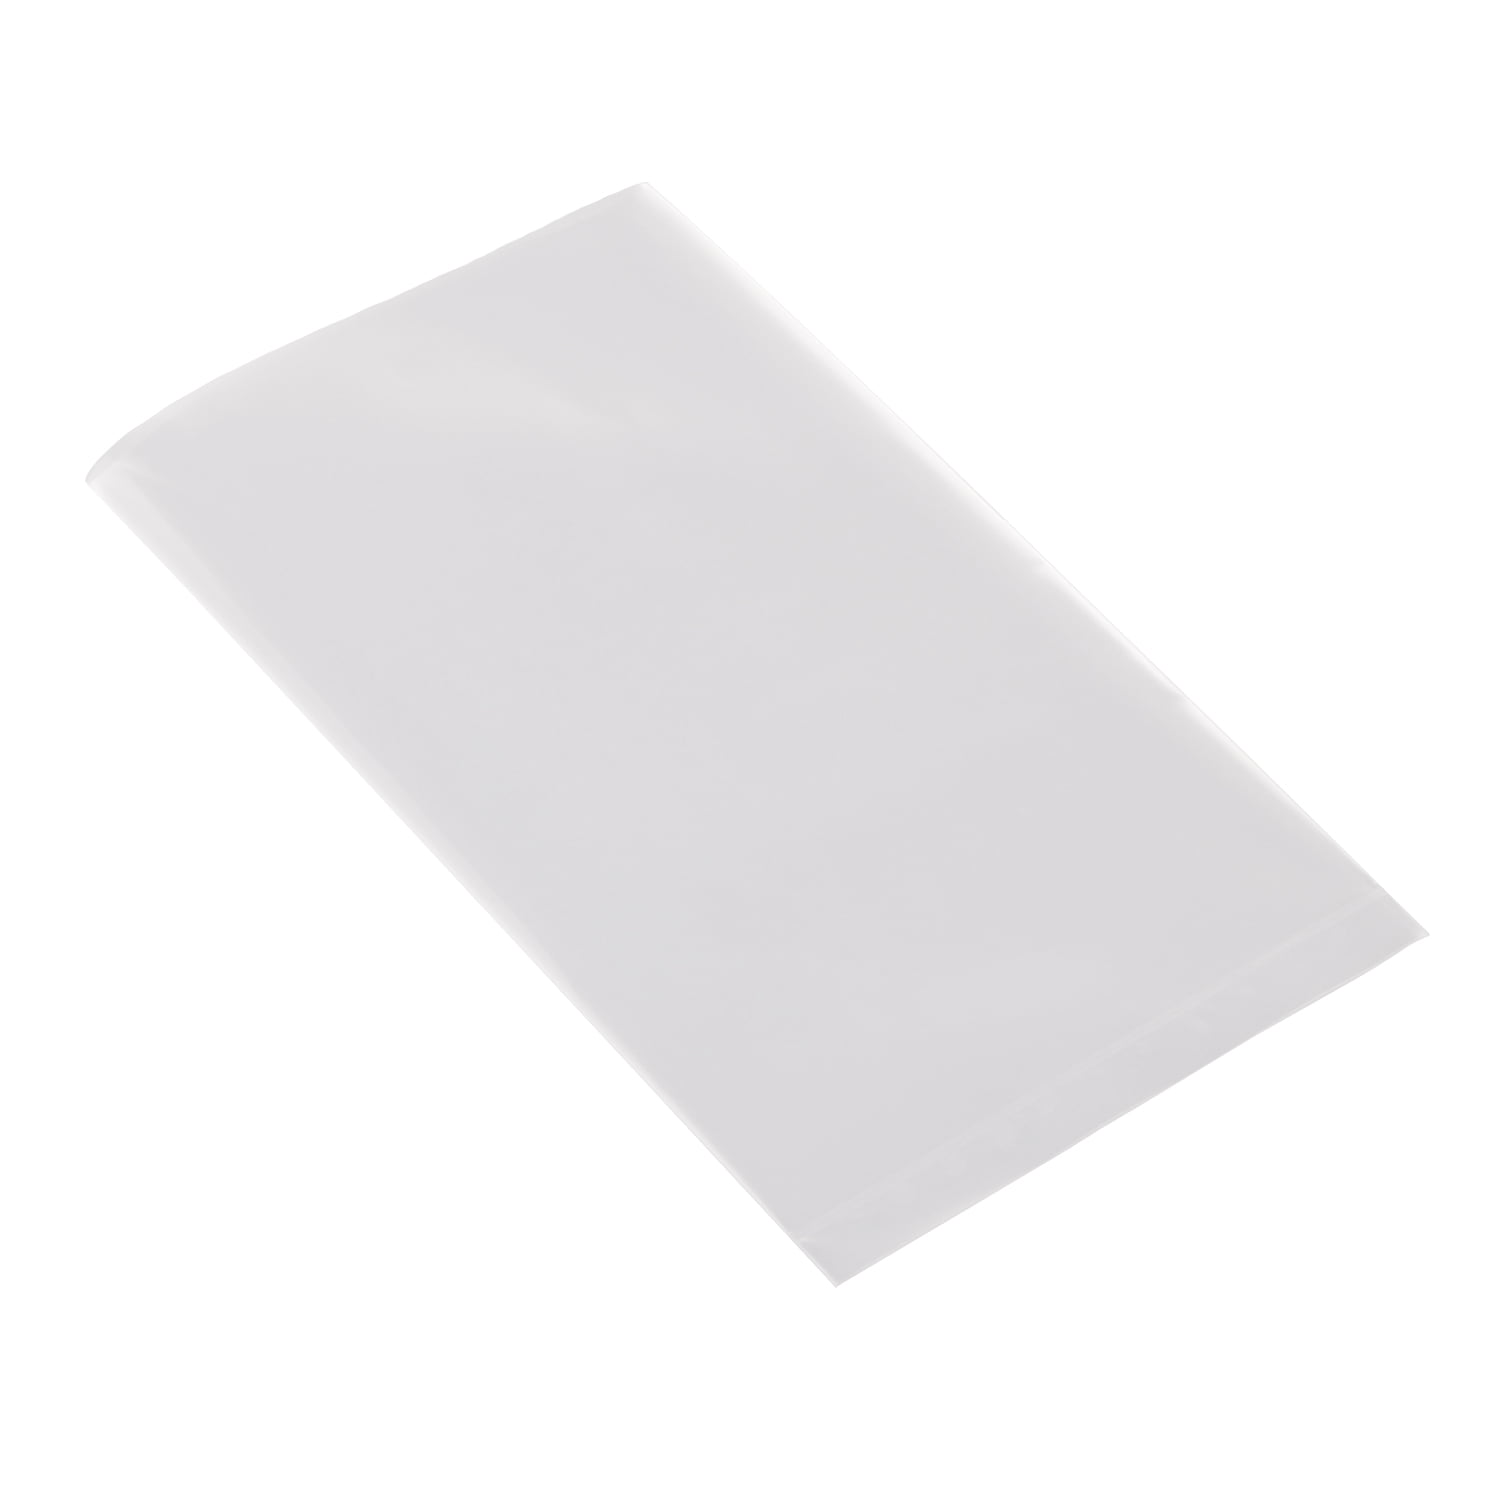 Clear Plastic Apparel Envelopes Cookie 4 x 6 Inches, Pack of 1000 Candy and Treat Bags Owlpack 3 Mil Poly Bag with Open End 